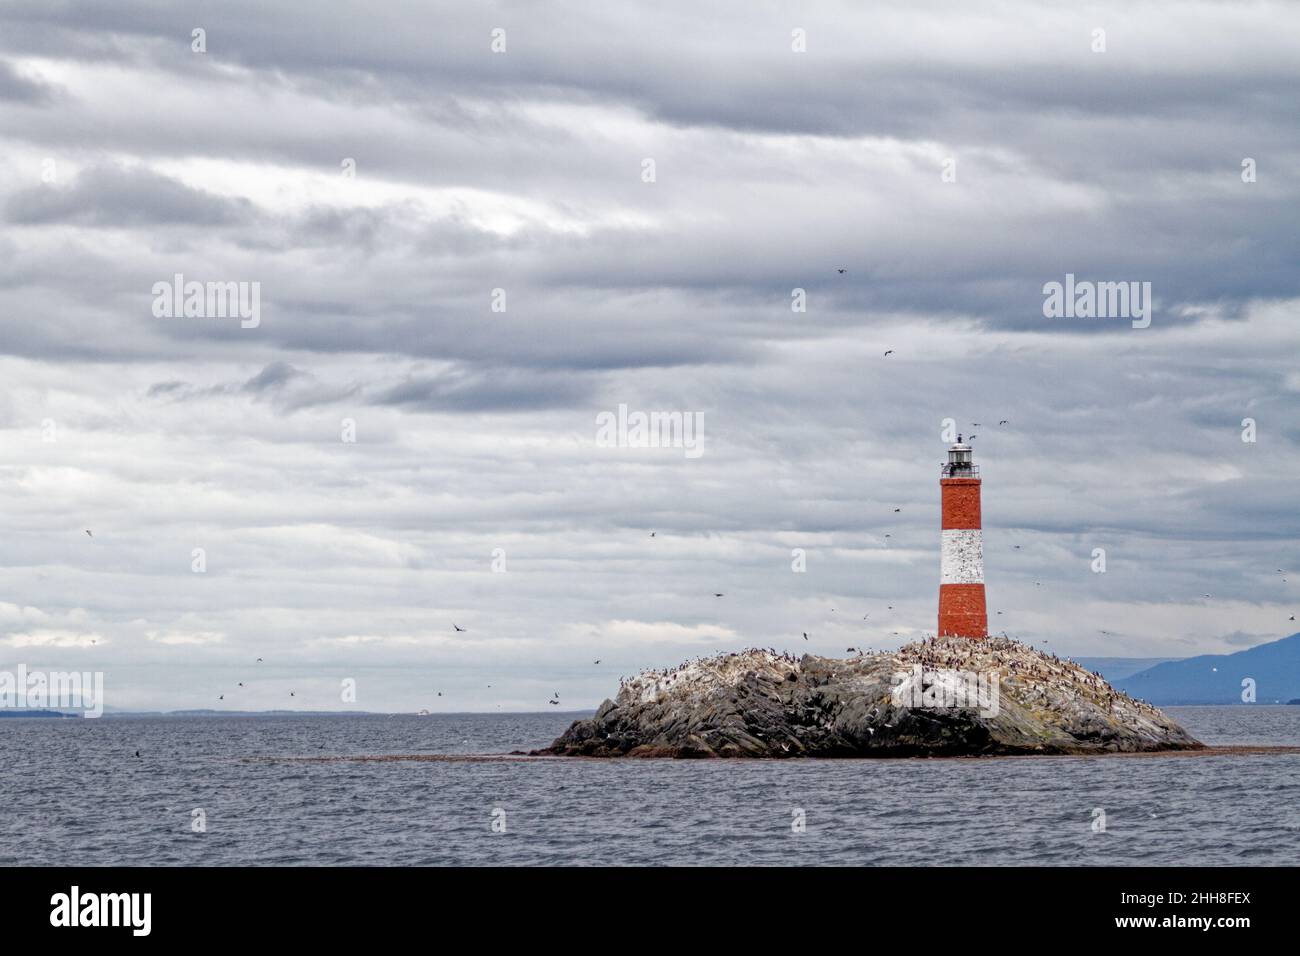 Les Eclaireurs Lighthouse - The Lighthouse at the End of the World, in the Beagle Channel near Ushuaia, Tierra del Fuego, southern Argentina Stock Photo